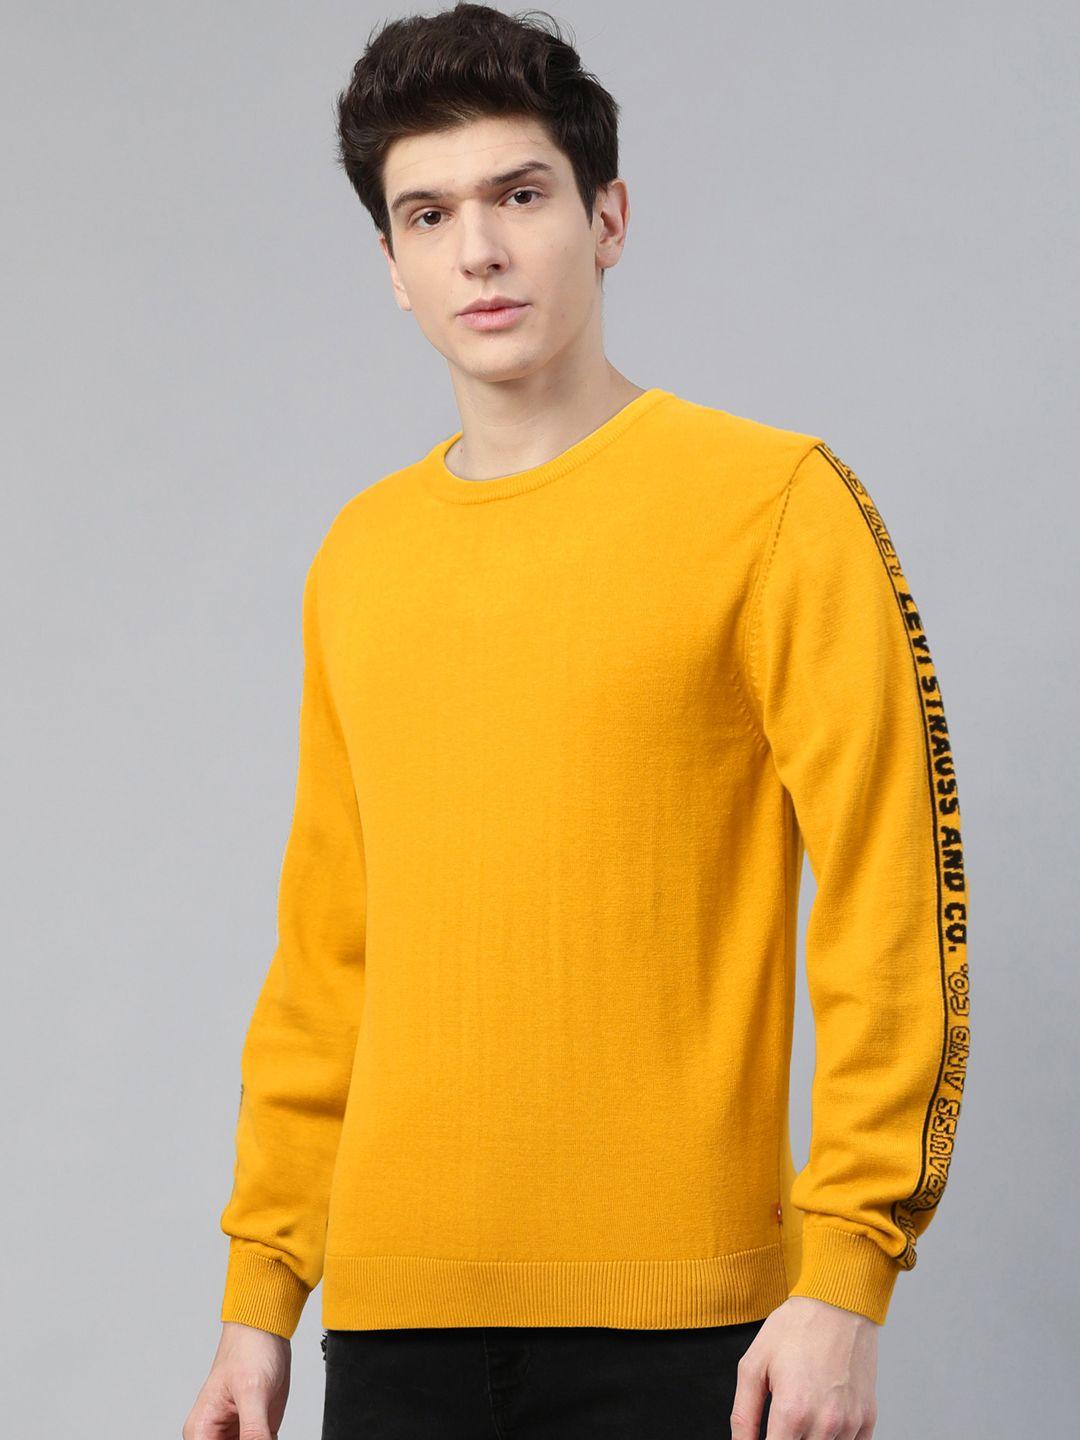 levis-men-mustard-yellow-solid-pullover-sweater